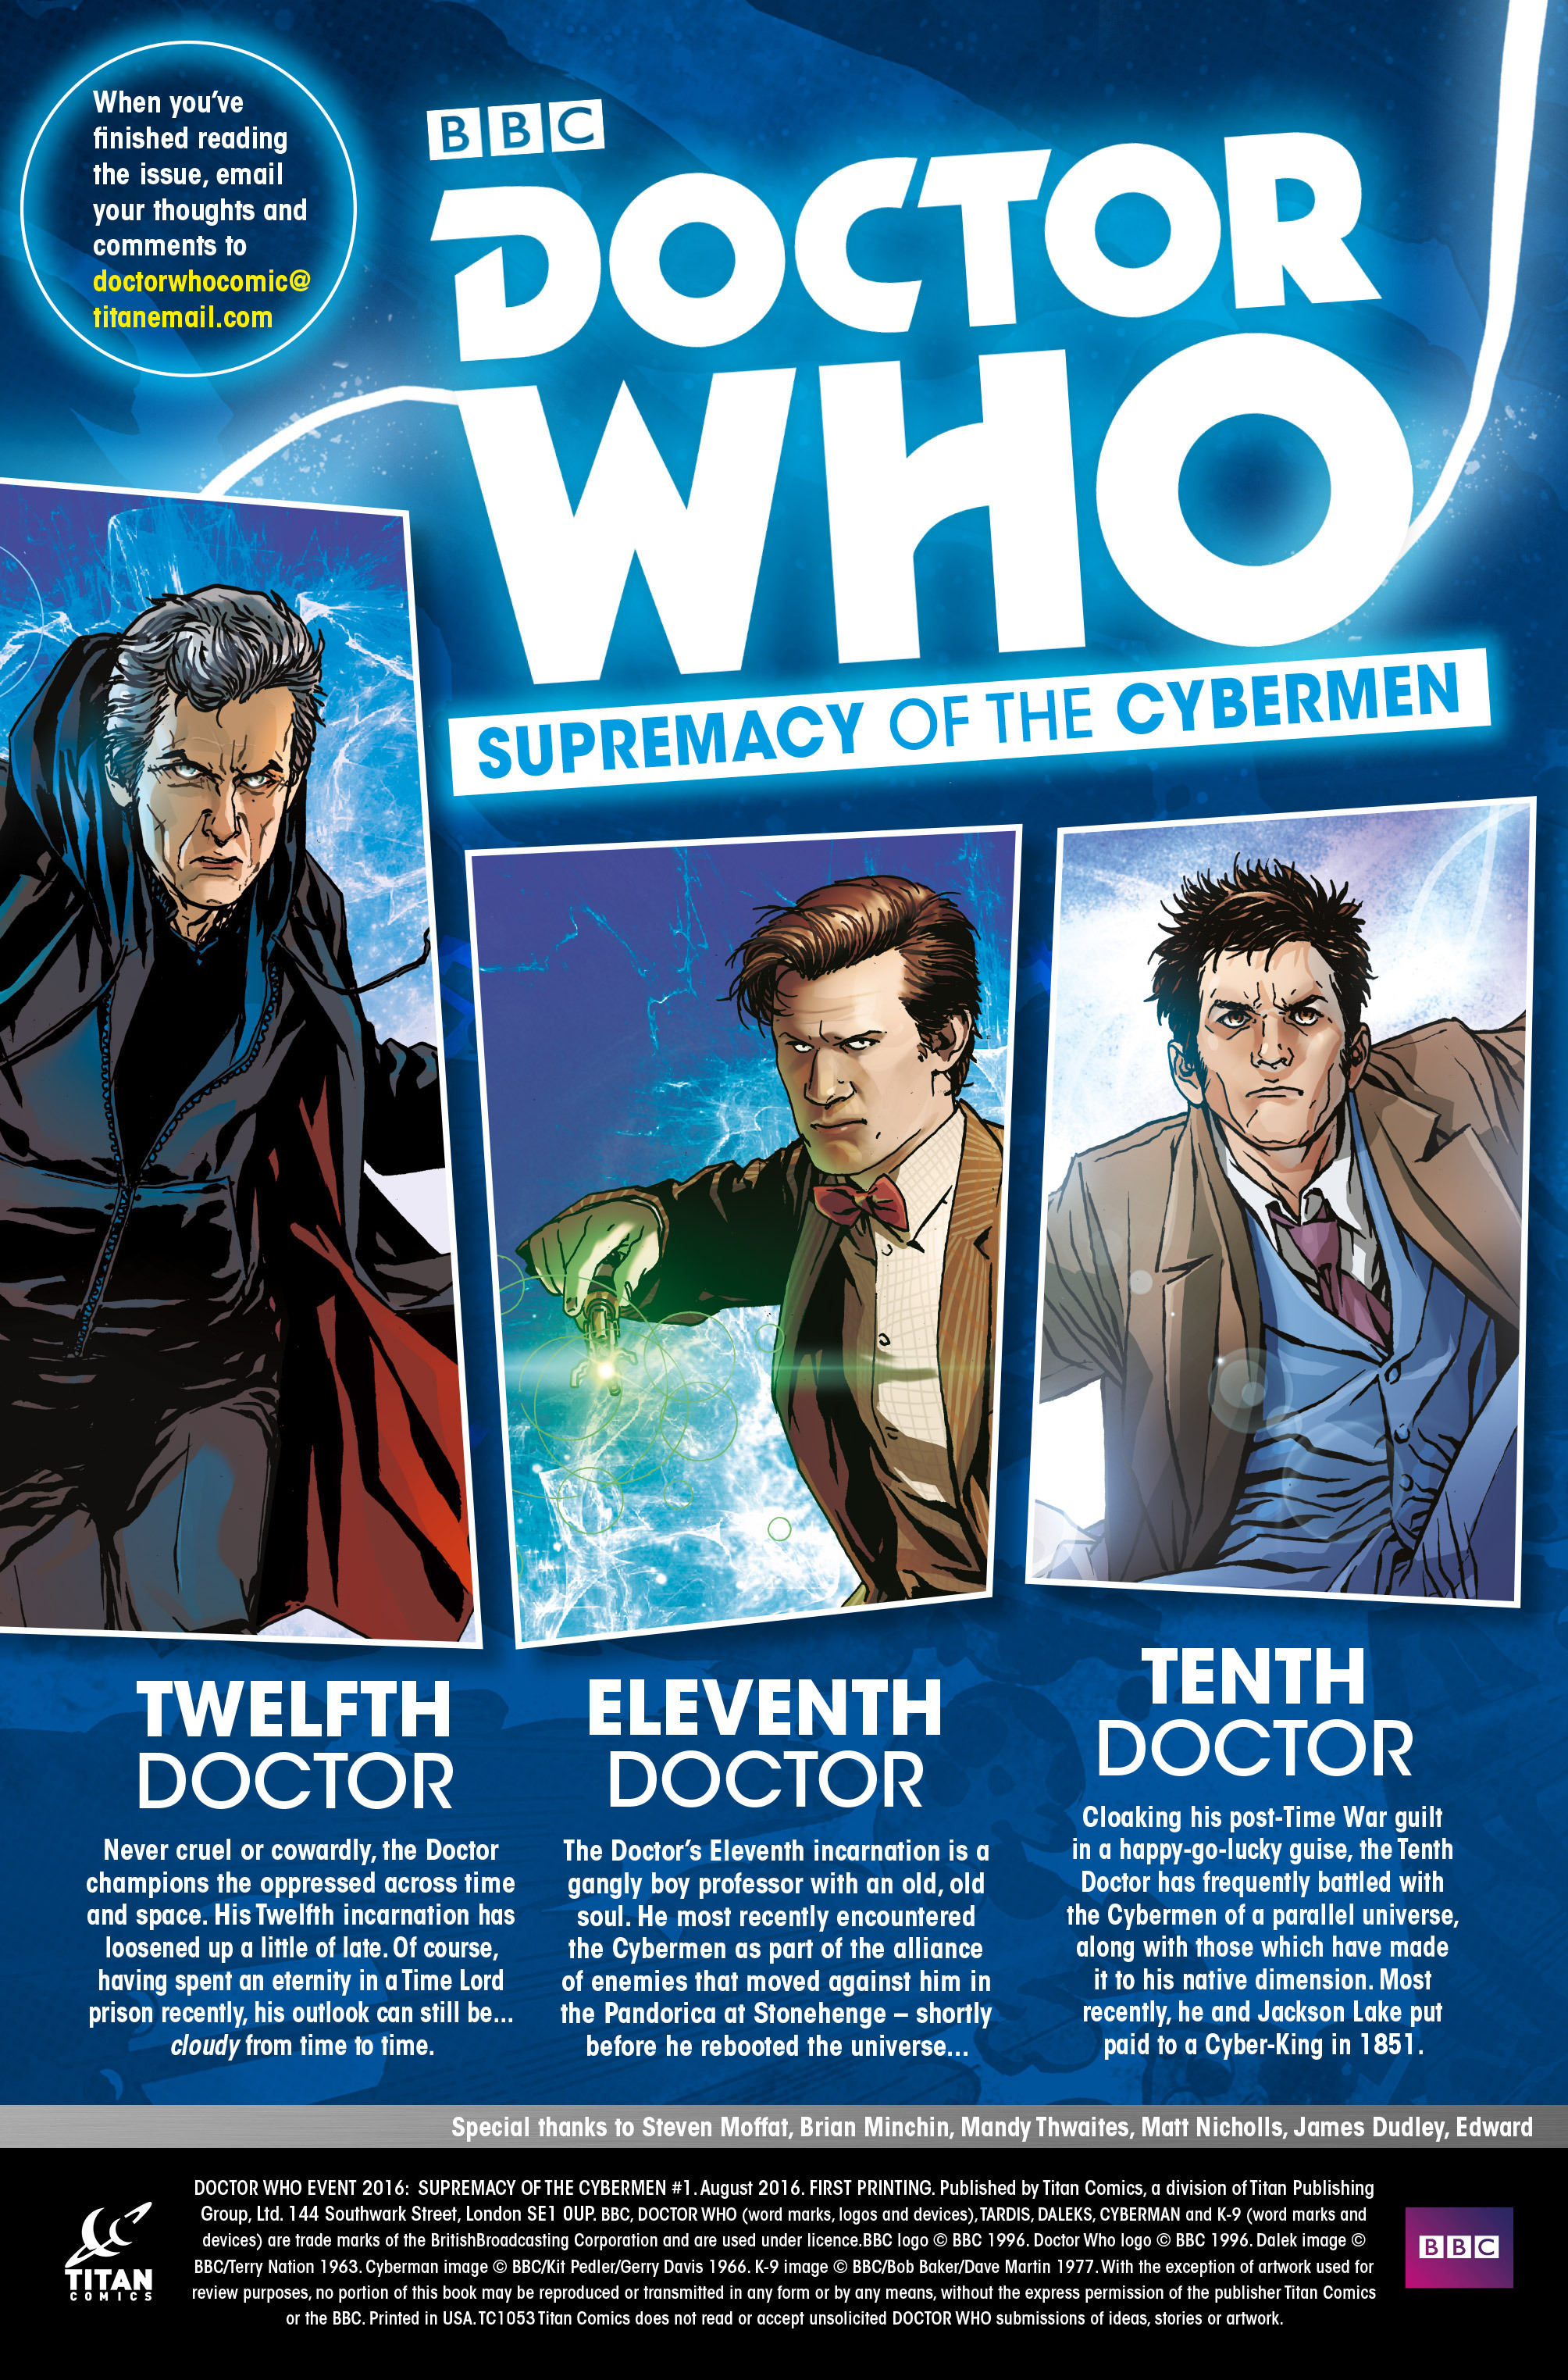 Read online Doctor Who Event 2016: Doctor Who Supremacy of the Cybermen comic -  Issue #1 - 5